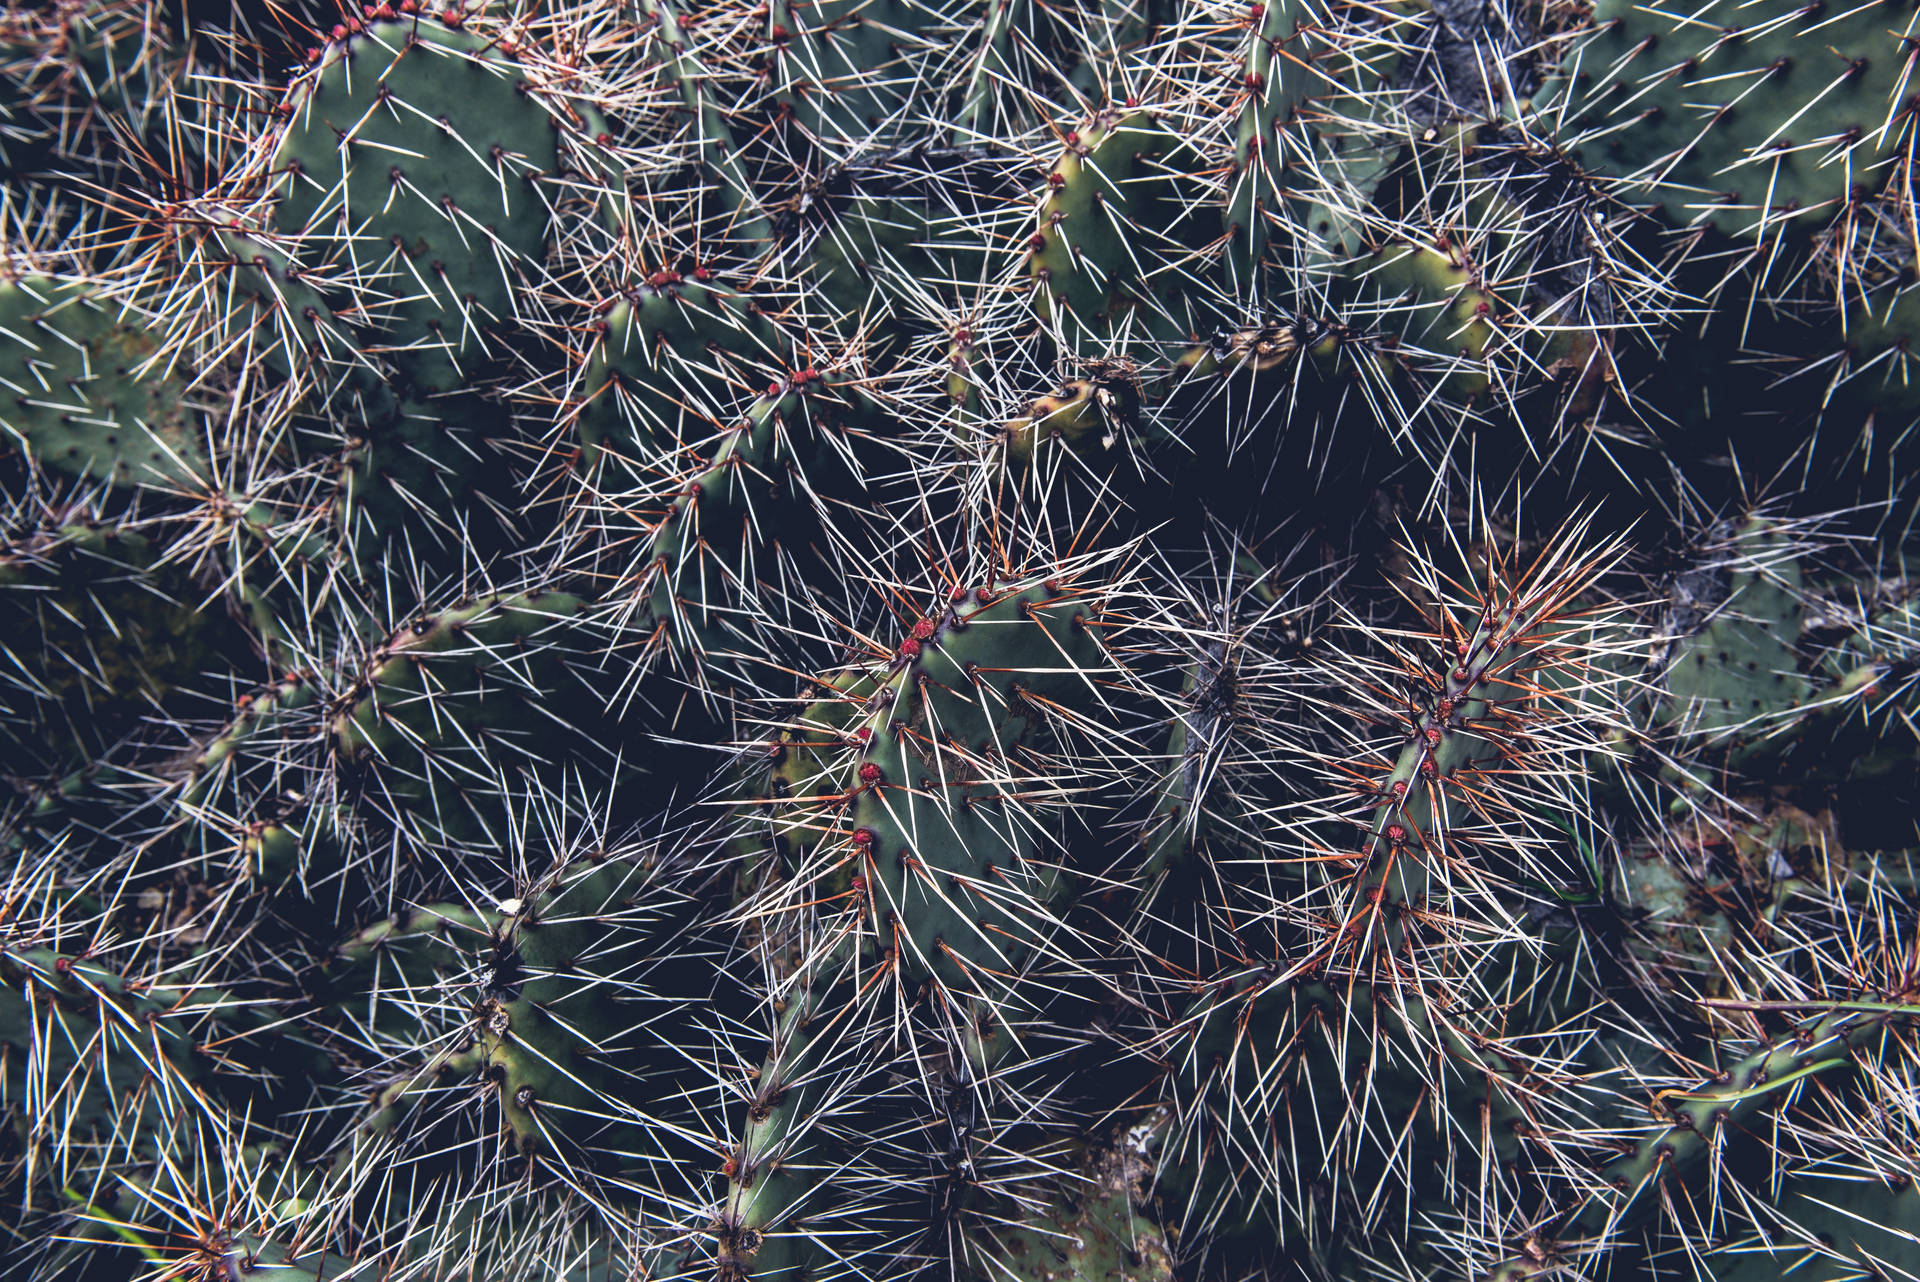 Cactus 6016X4016 Wallpaper and Background Image